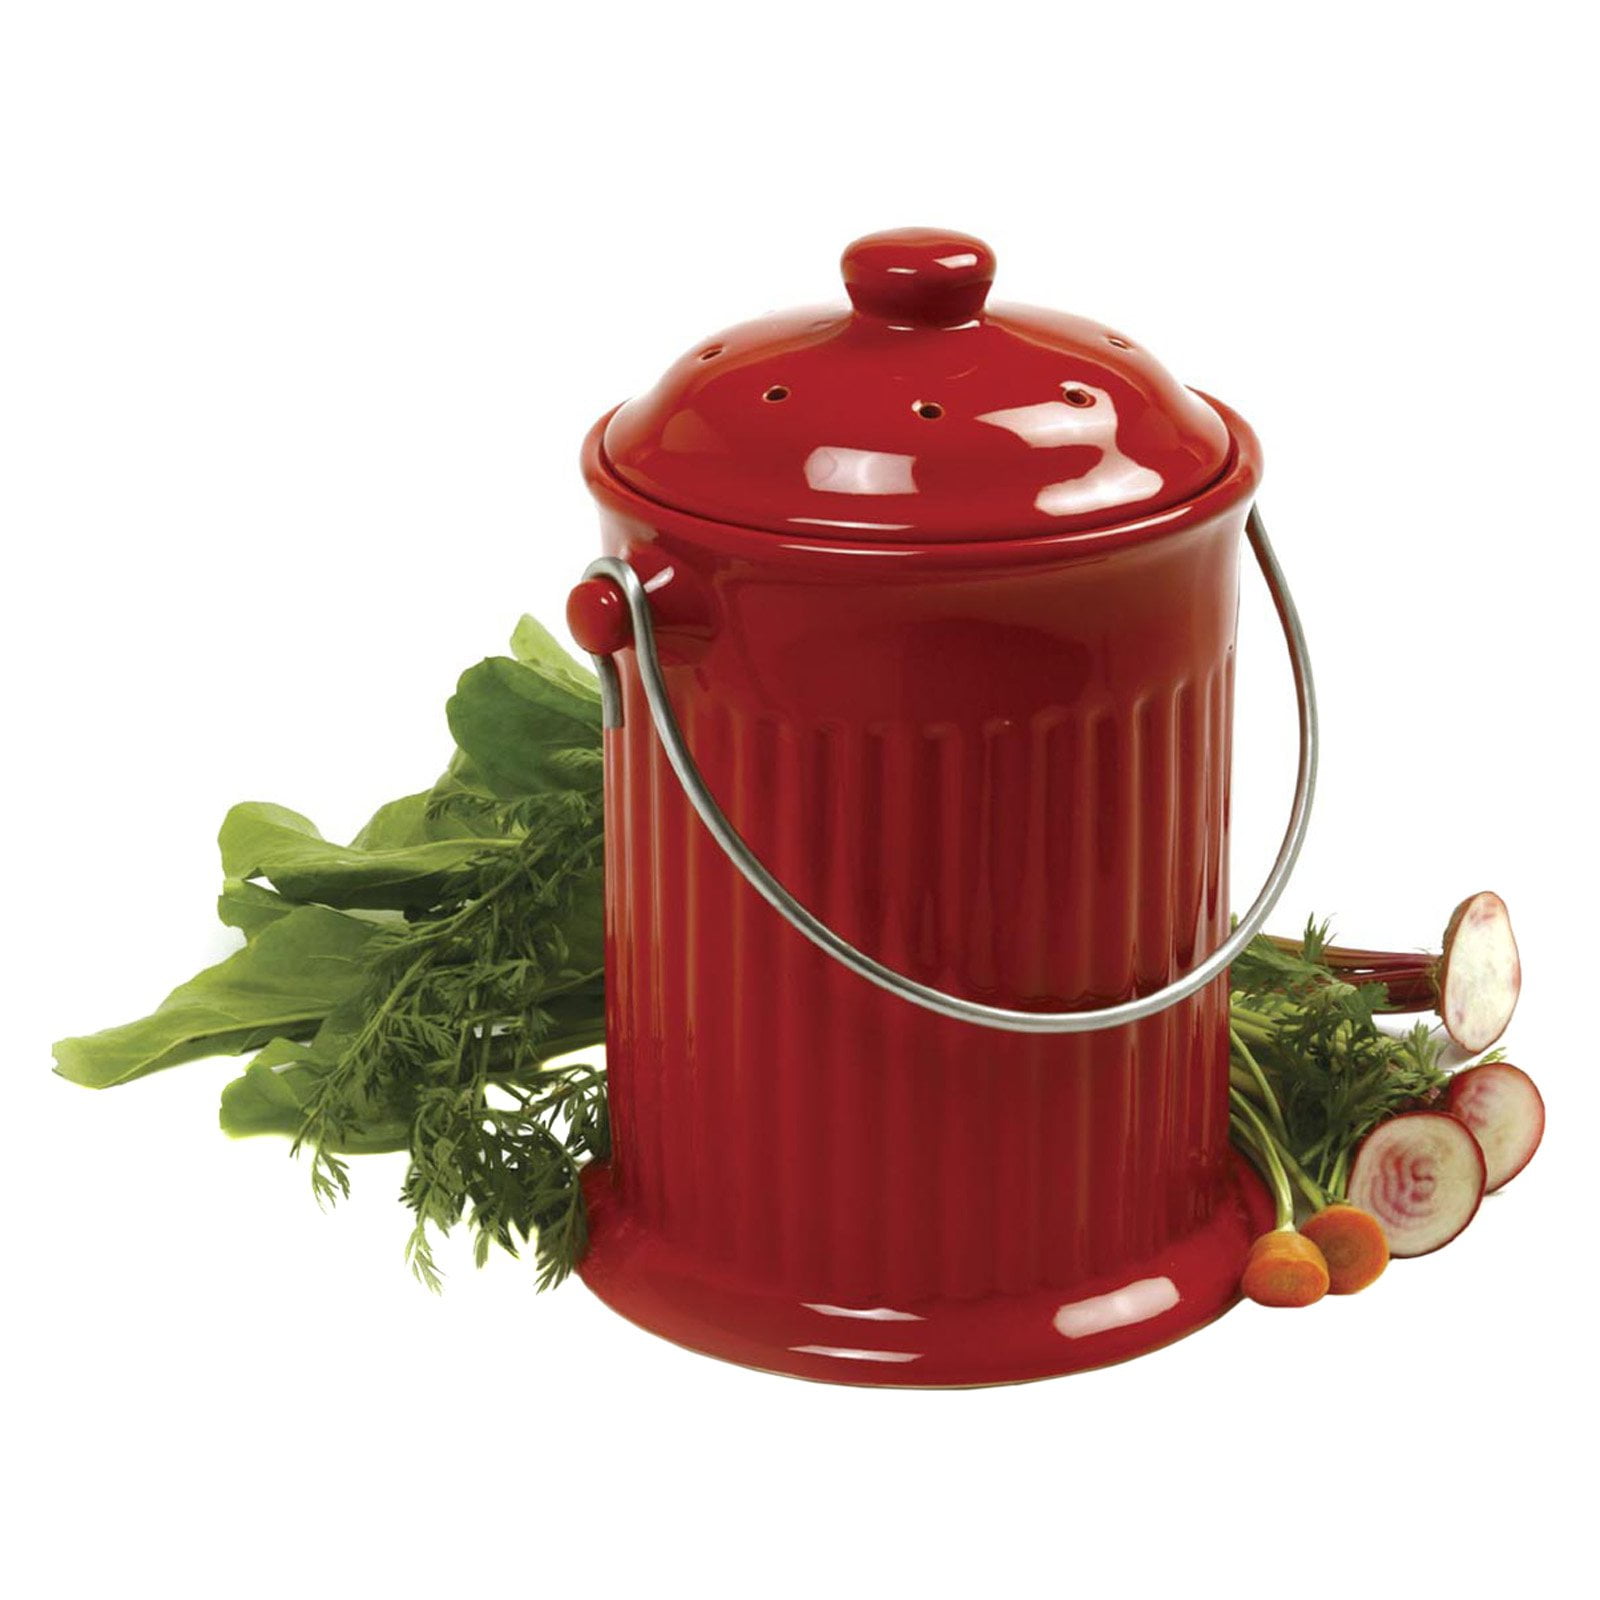 Cooler Kitchen 3 Liter Compost Bin With EZ-No Lock Lid, Plastic Liner & Charcoal  Filters-Sturdy Construction & Odor-Free Seal W/Dishwasher Safe Bucket - Red